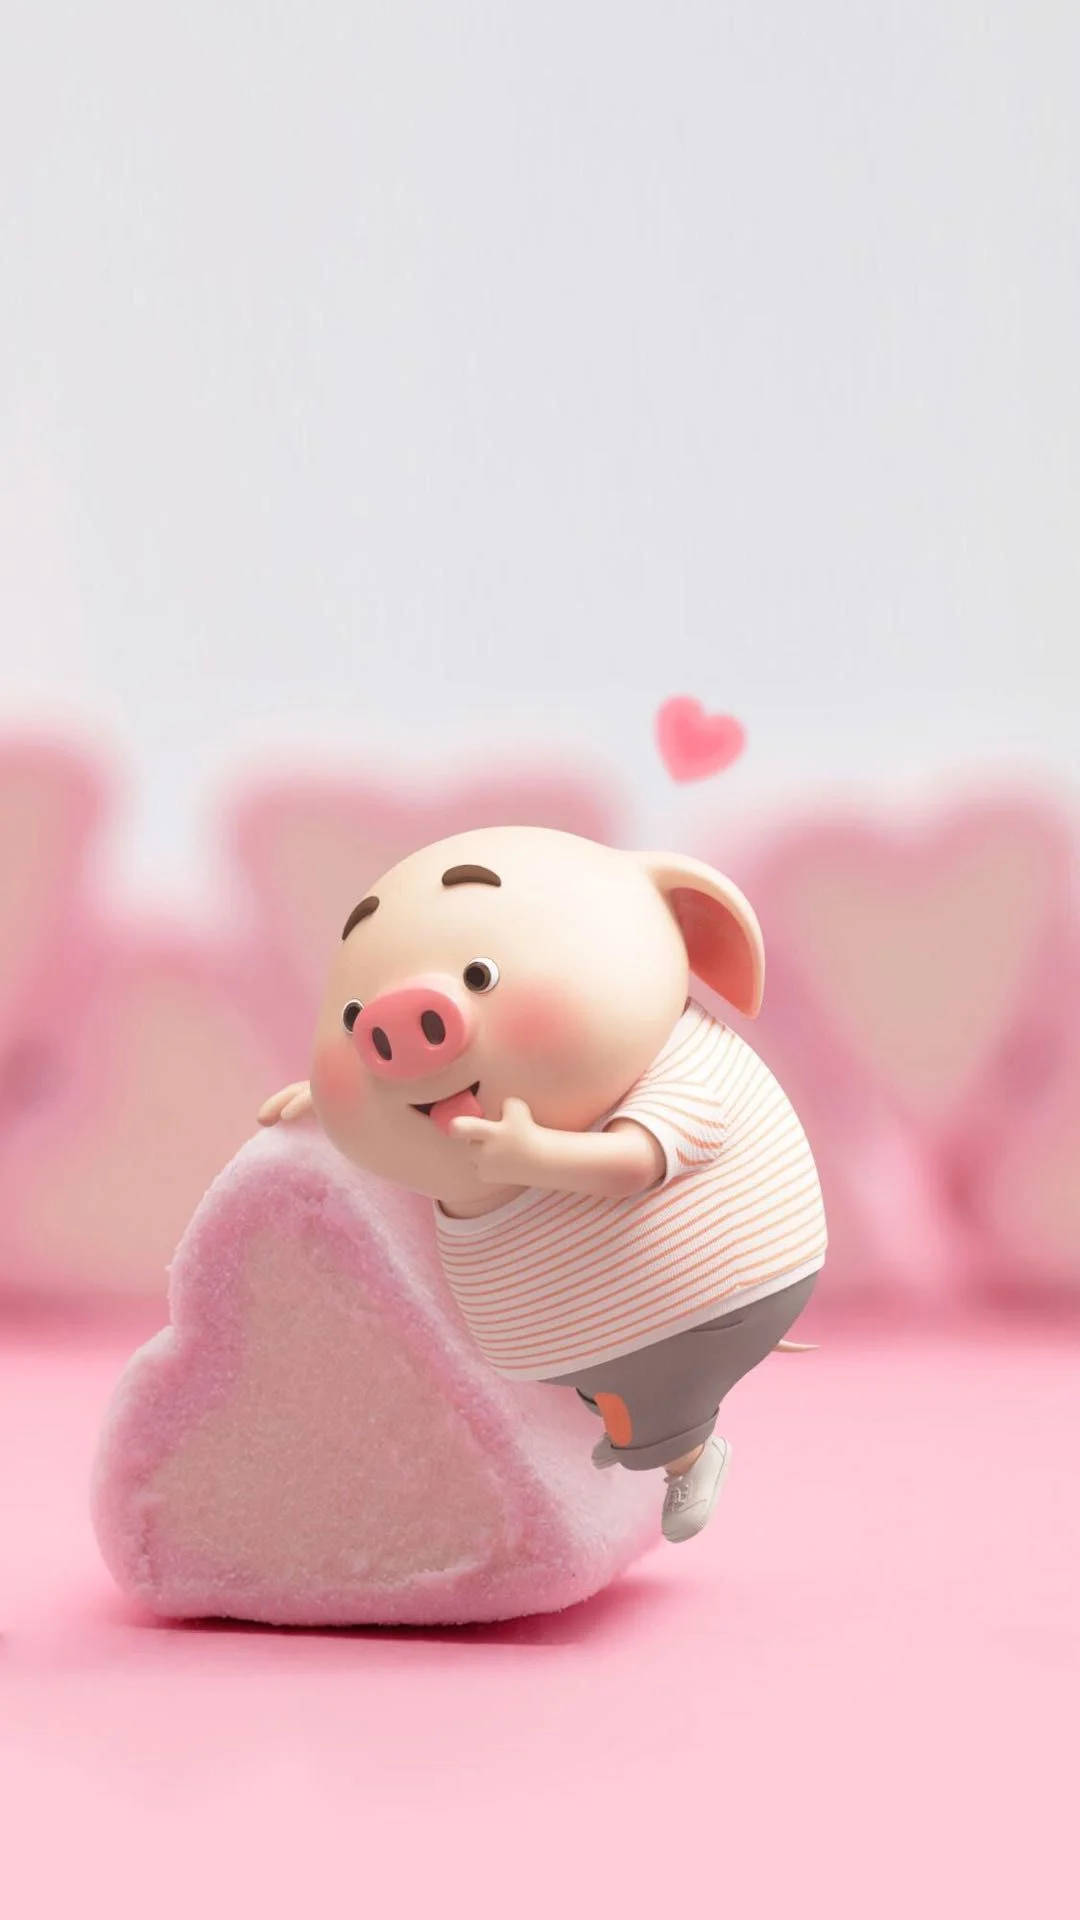 Cute Pig Heart Marshmallow Background